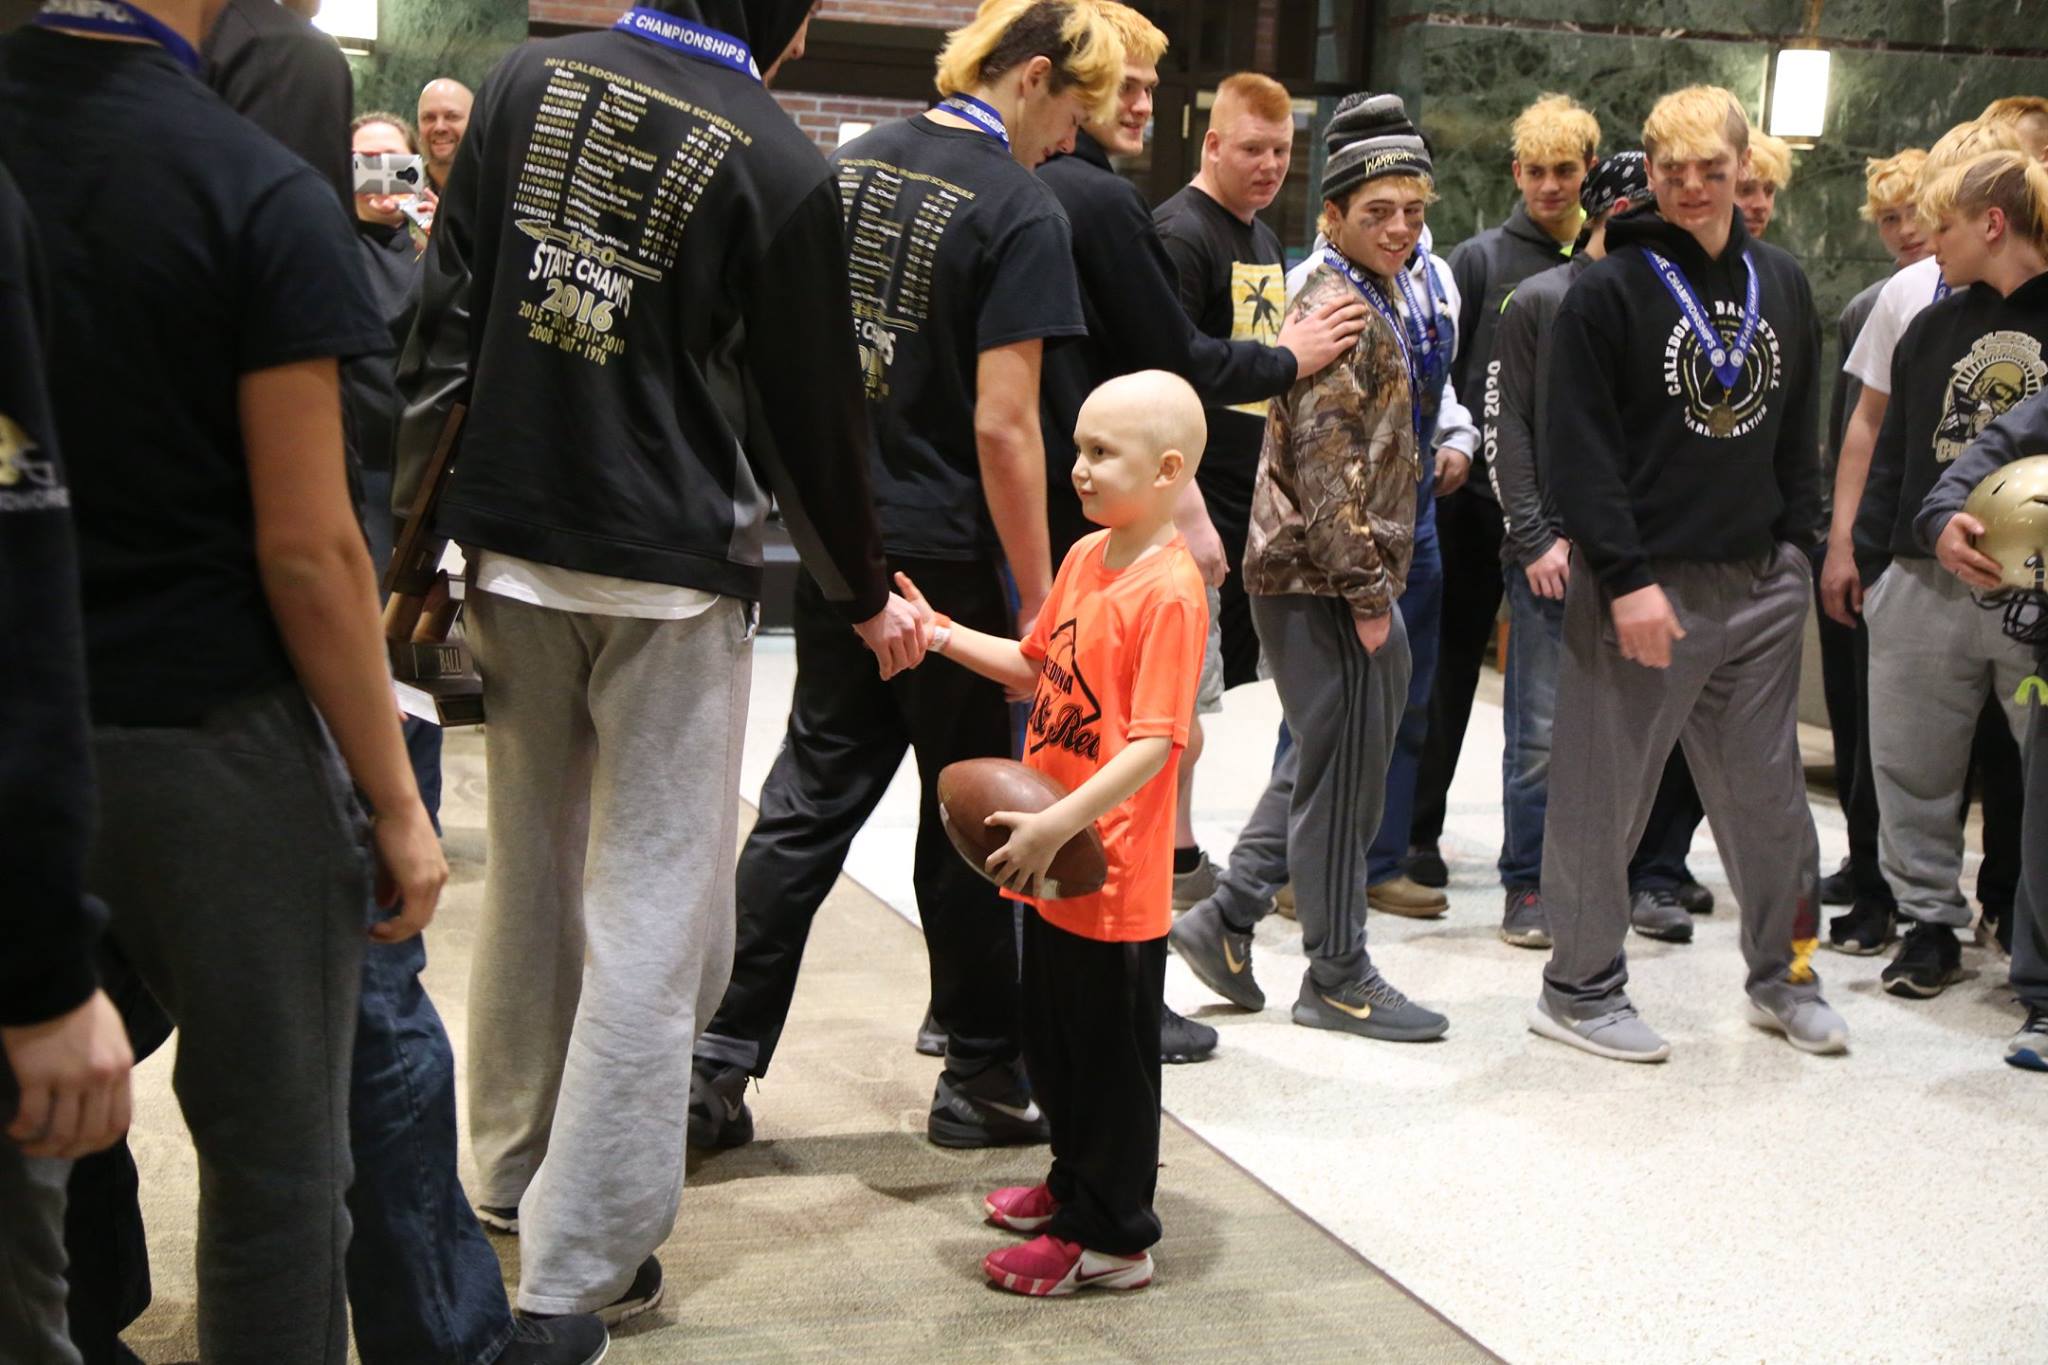 After 41 consecutive wins and 3rd state championship, Caledonia meets real hero